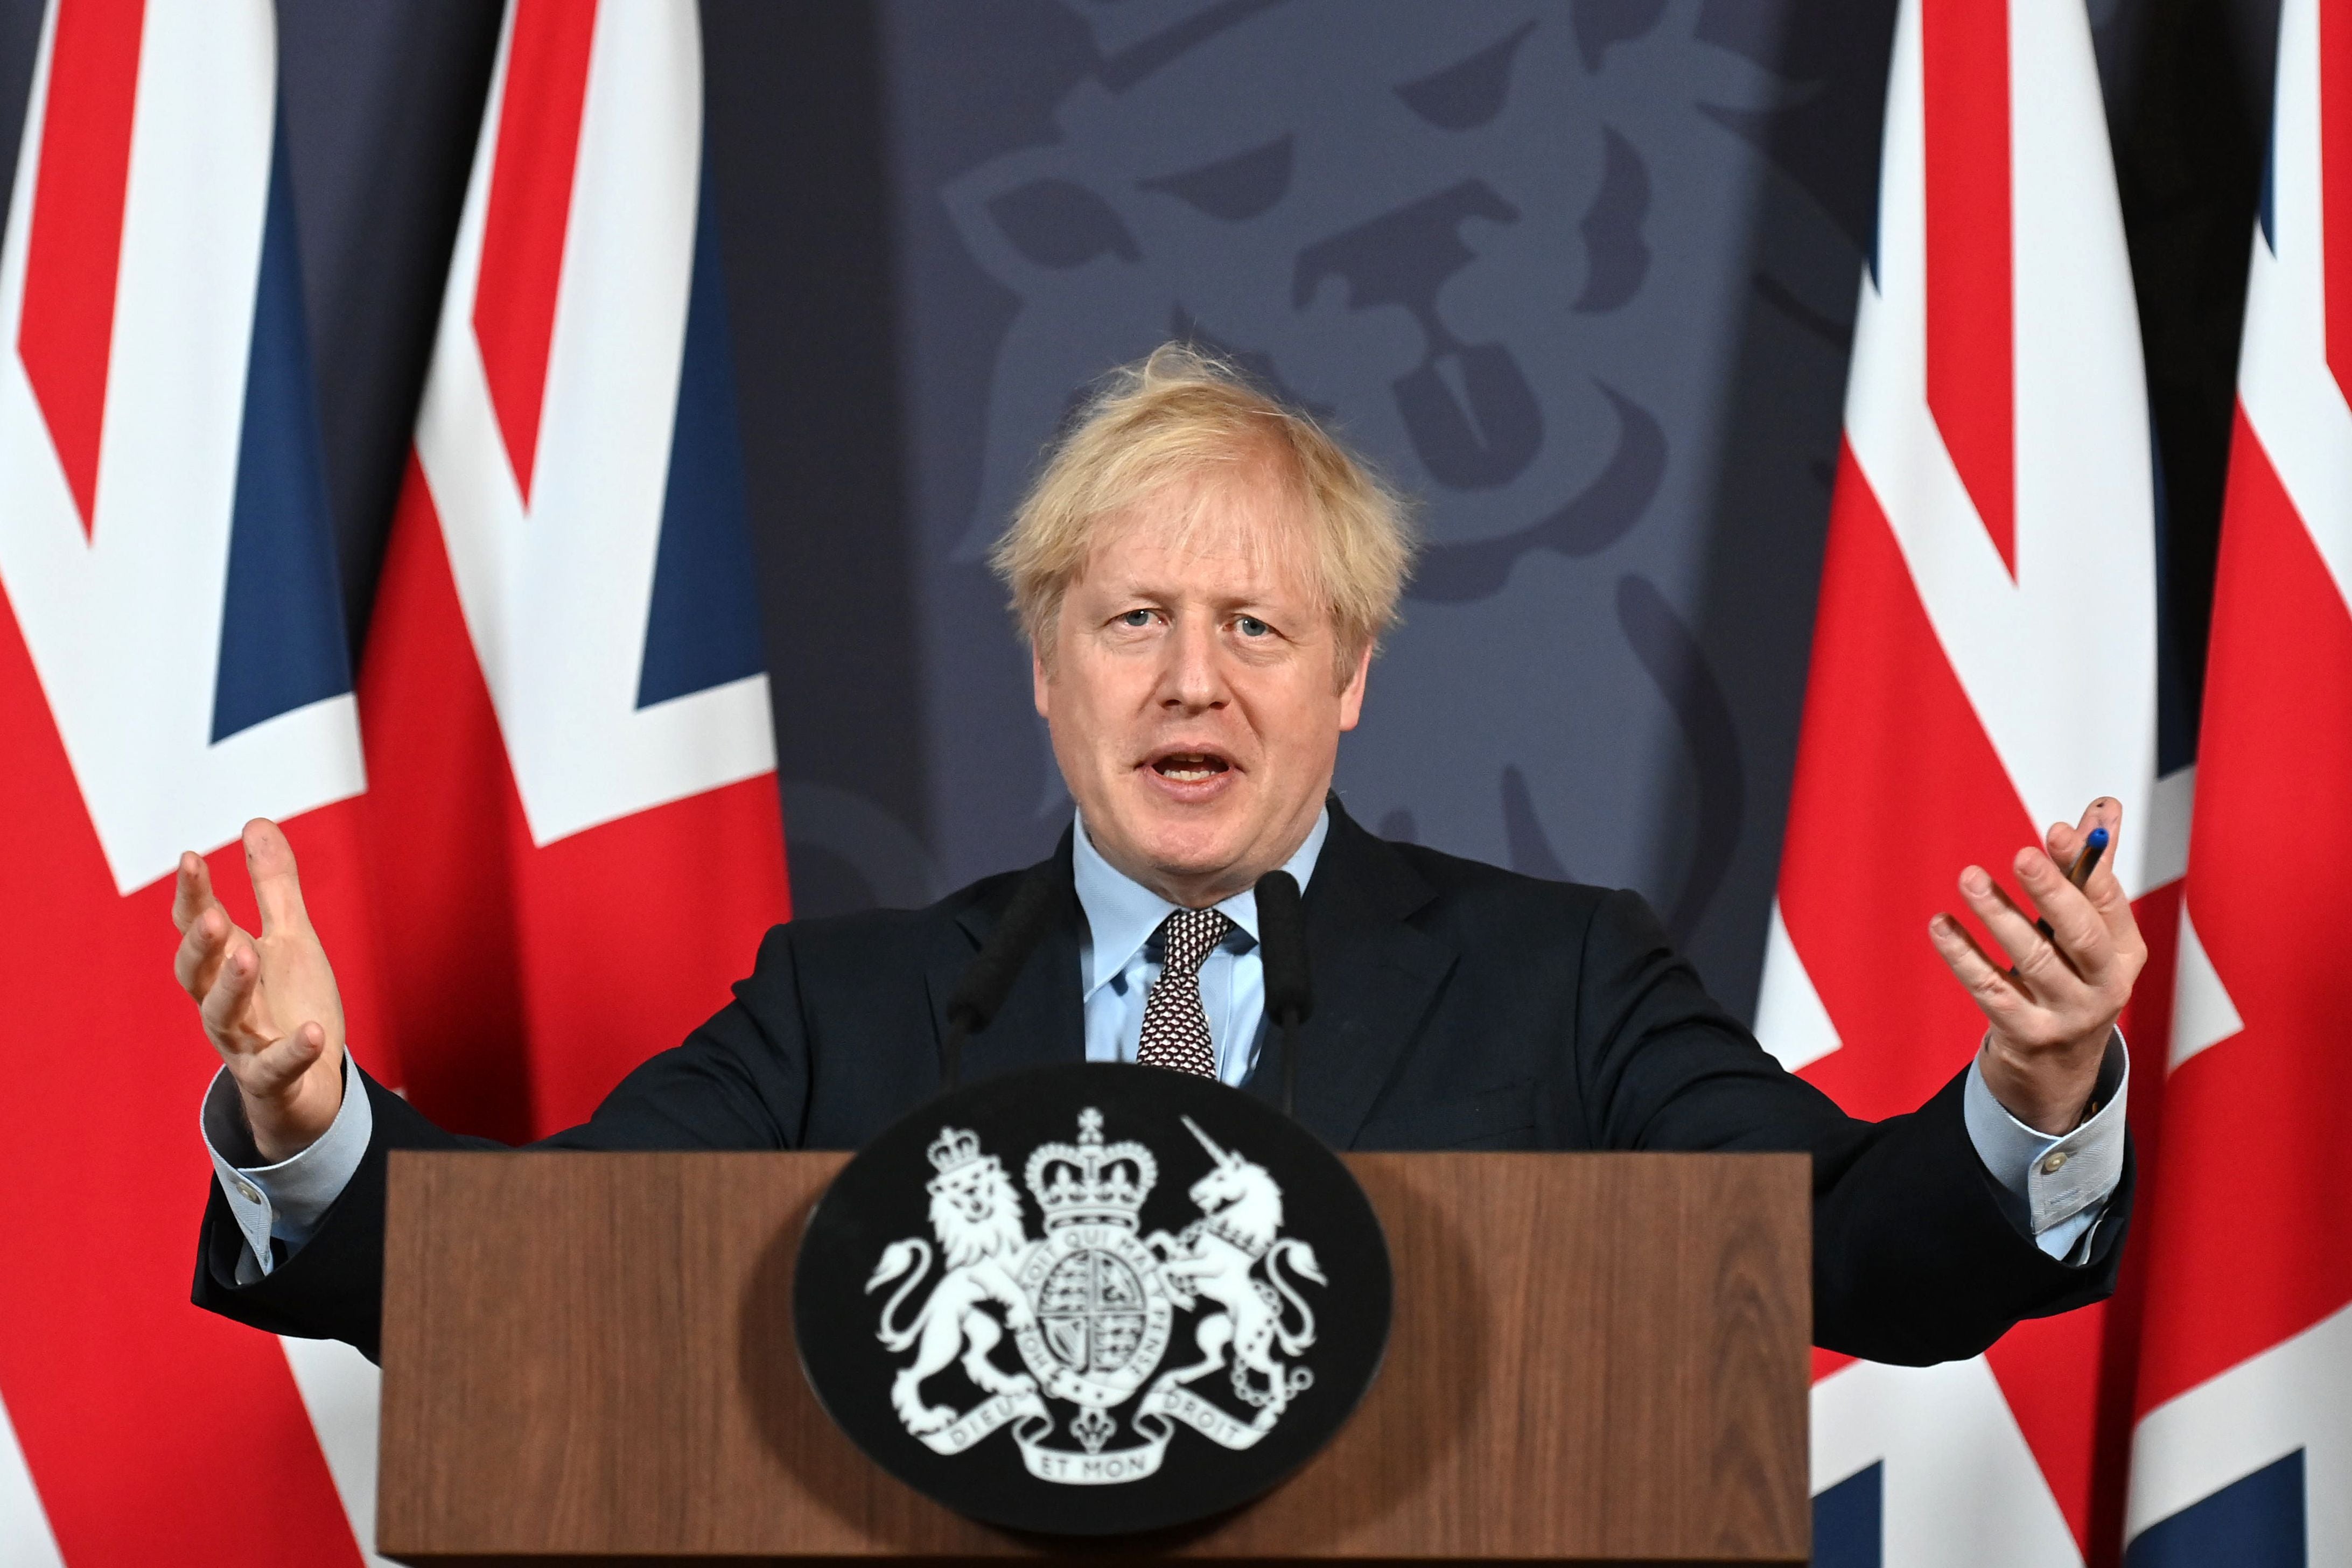 Boris Johnson has faced a number of questions over Brexit in recent days